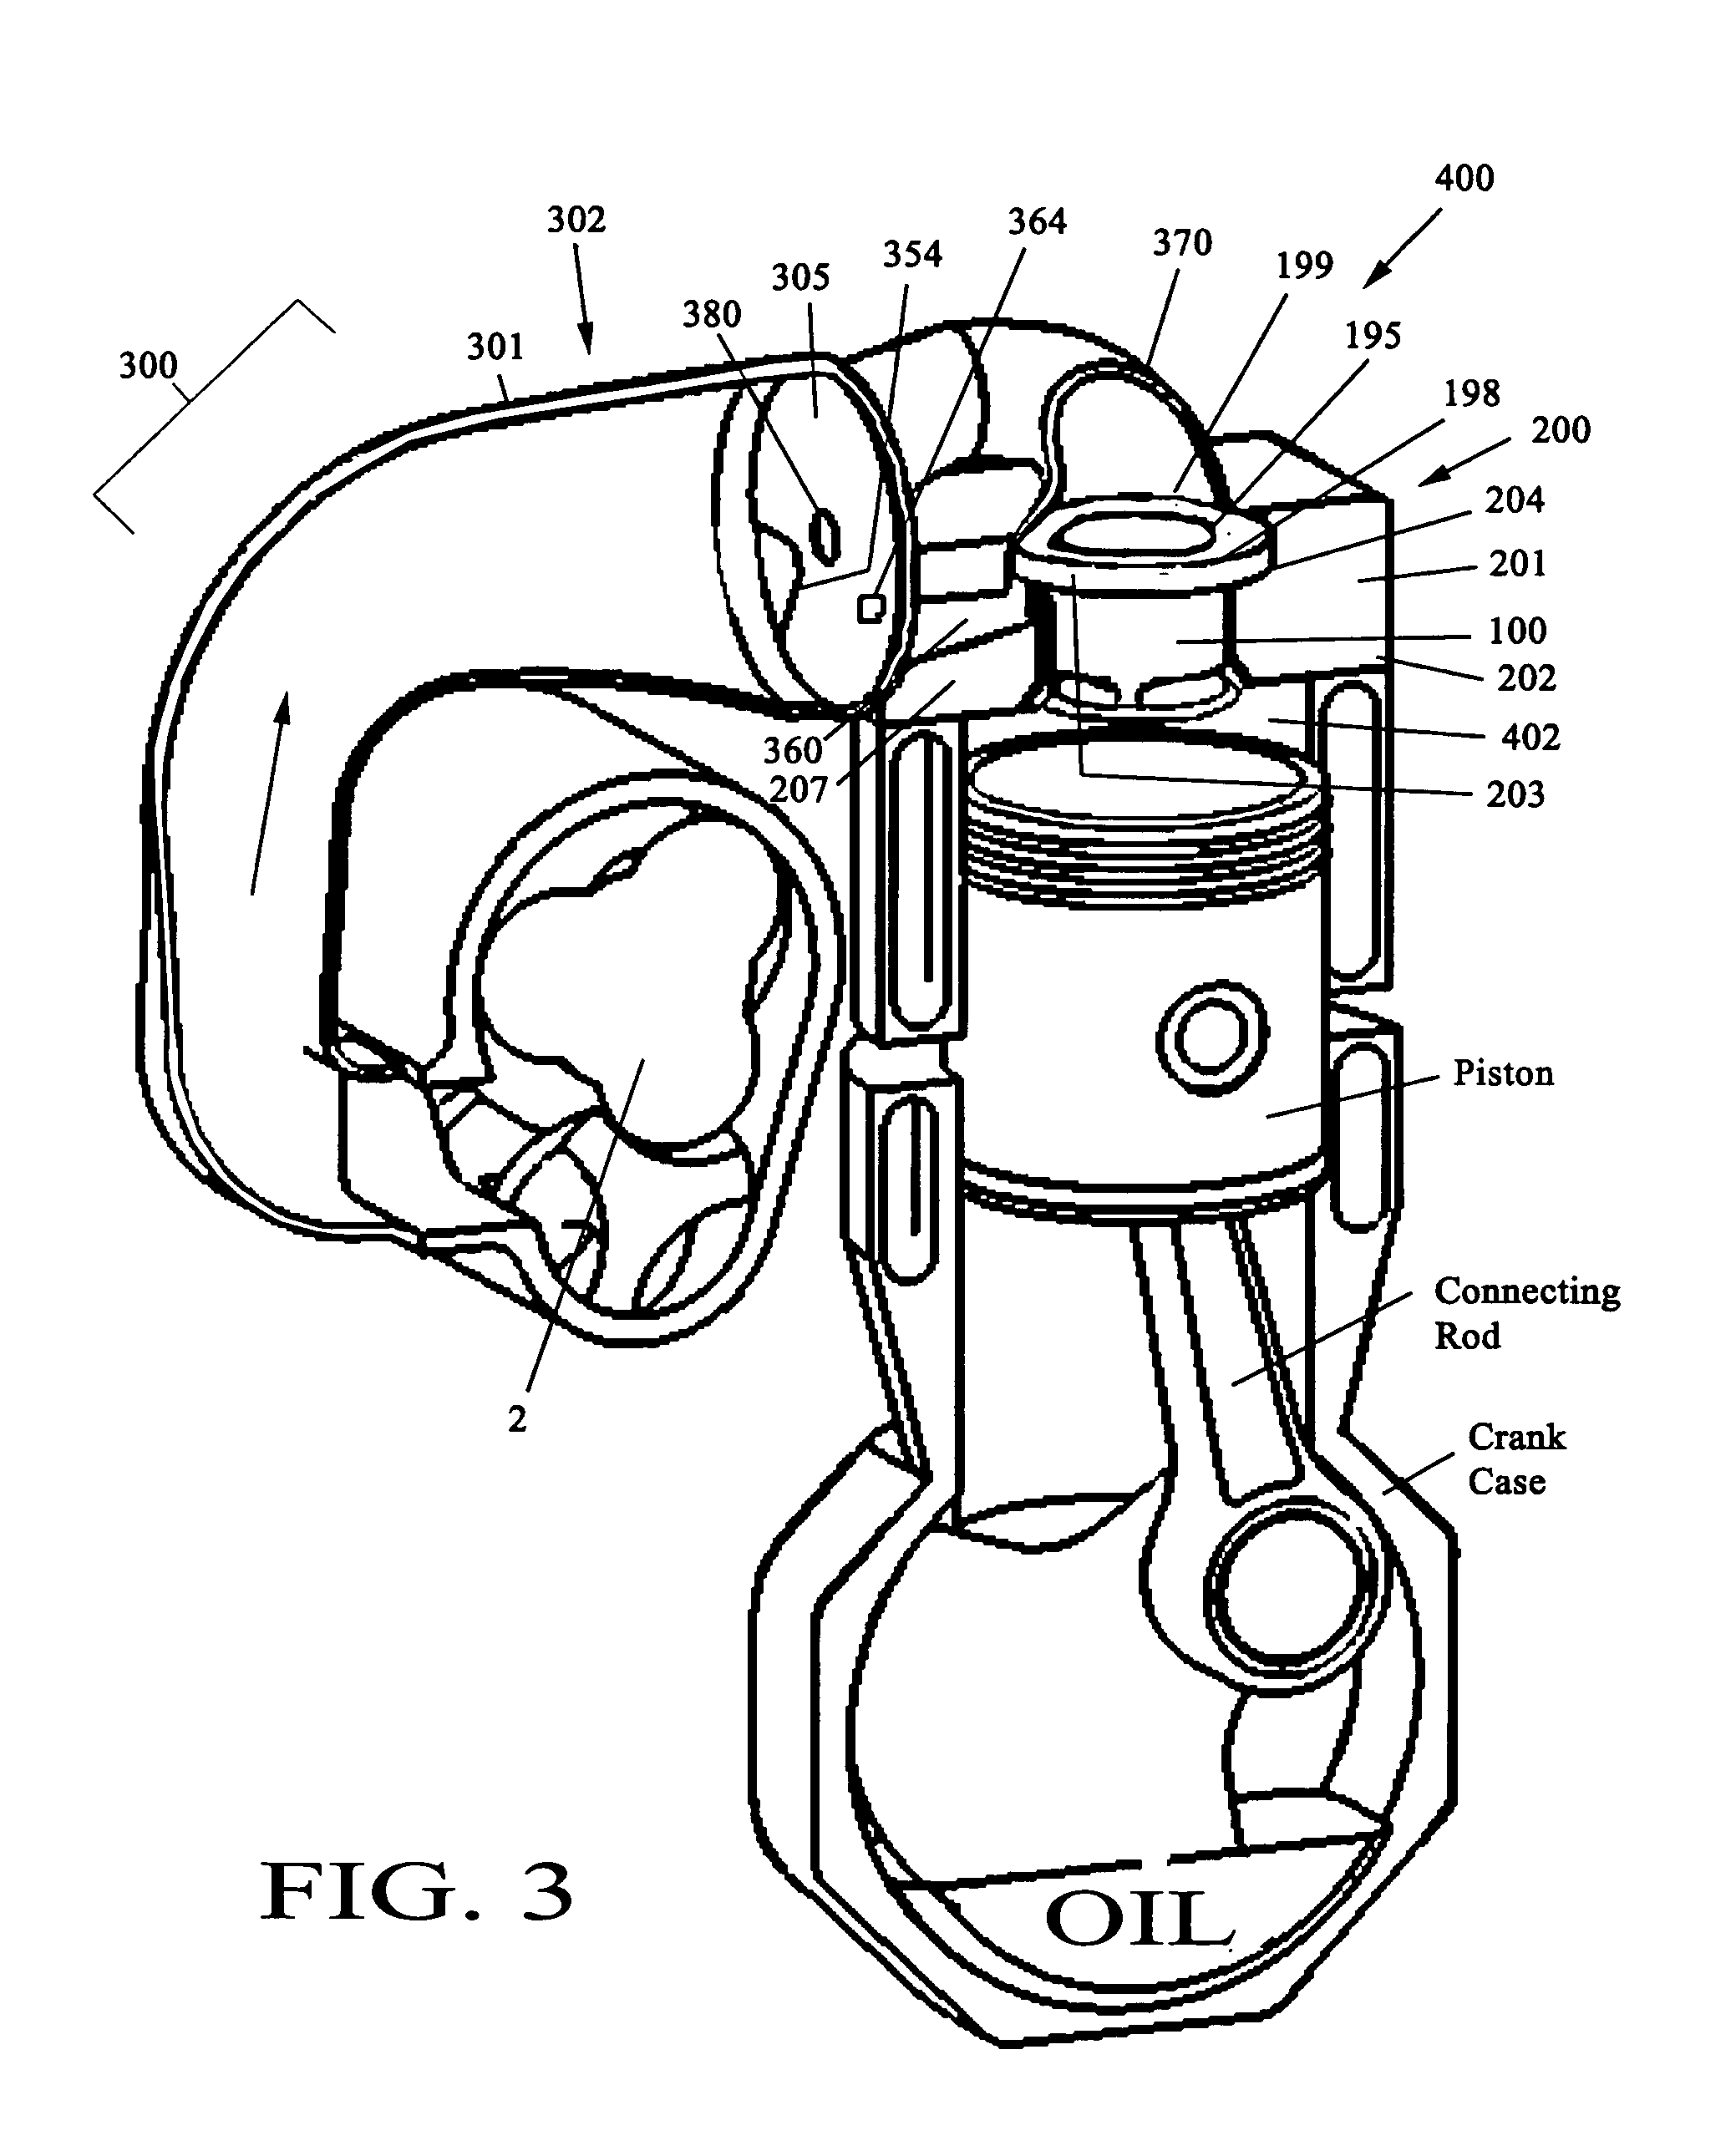 Pneumatically actuated valve for internal combustion engines